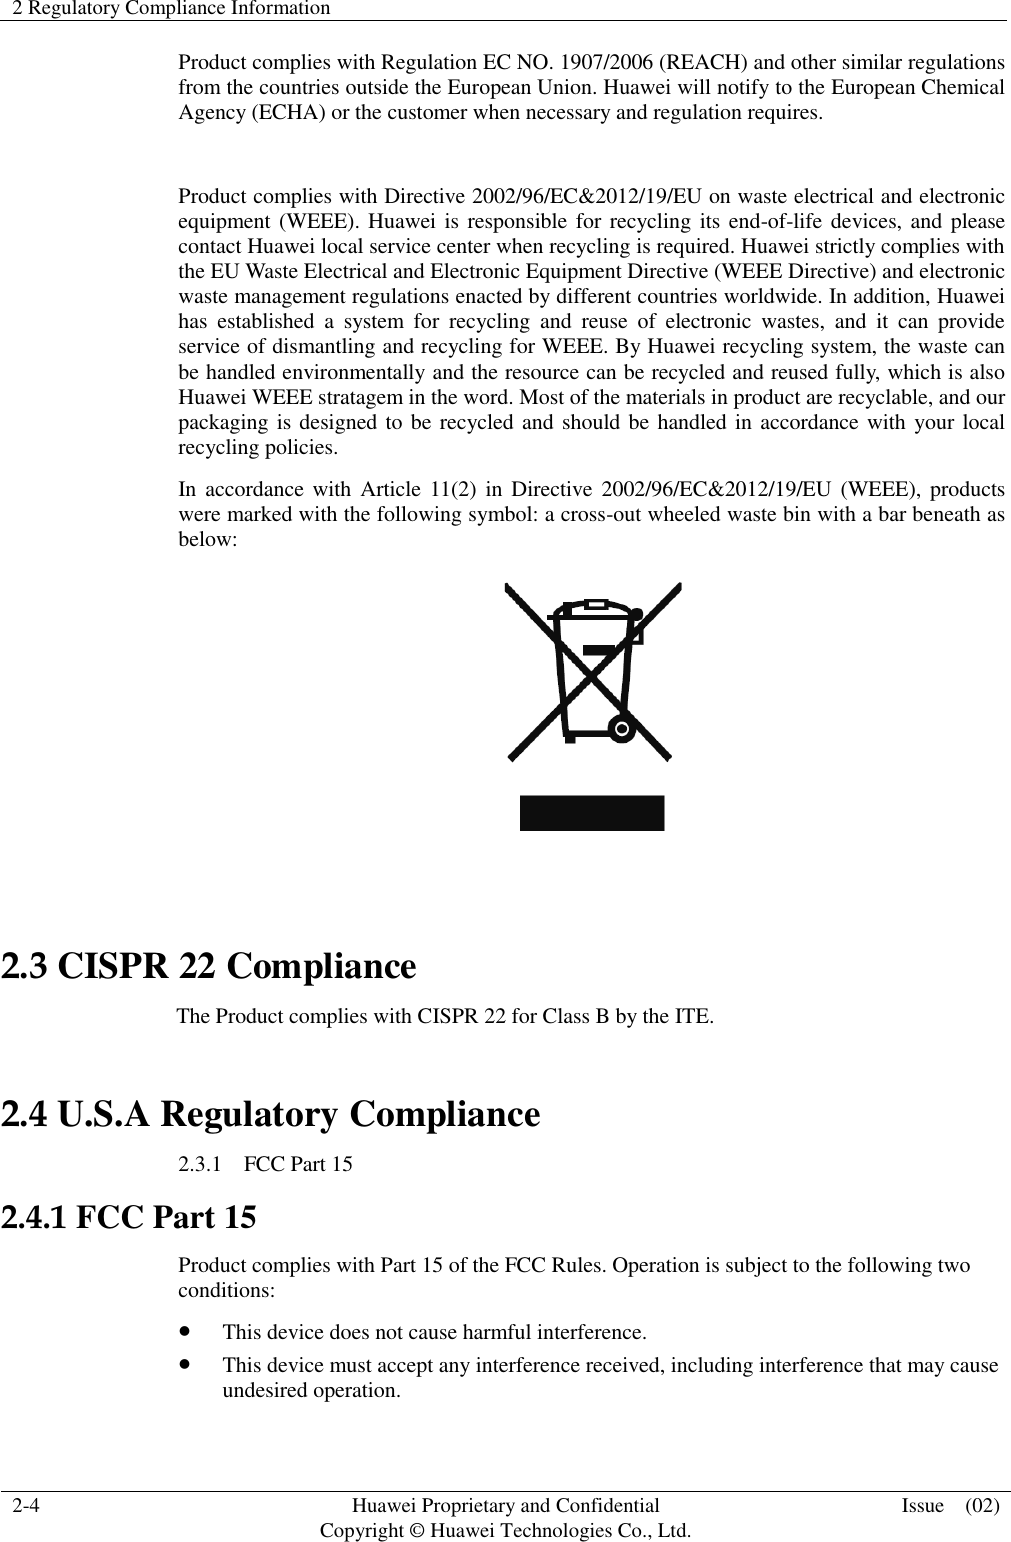 2 Regulatory Compliance Information    2-4 Huawei Proprietary and Confidential                                     Copyright © Huawei Technologies Co., Ltd. Issue    (02)  Product complies with Regulation EC NO. 1907/2006 (REACH) and other similar regulations from the countries outside the European Union. Huawei will notify to the European Chemical Agency (ECHA) or the customer when necessary and regulation requires.  Product complies with Directive 2002/96/EC&amp;2012/19/EU on waste electrical and electronic equipment (WEEE). Huawei is responsible for recycling its end-of-life devices, and please contact Huawei local service center when recycling is required. Huawei strictly complies with the EU Waste Electrical and Electronic Equipment Directive (WEEE Directive) and electronic waste management regulations enacted by different countries worldwide. In addition, Huawei has  established  a  system  for  recycling  and  reuse  of  electronic  wastes,  and  it  can  provide service of dismantling and recycling for WEEE. By Huawei recycling system, the waste can be handled environmentally and the resource can be recycled and reused fully, which is also Huawei WEEE stratagem in the word. Most of the materials in product are recyclable, and our packaging is designed to be recycled and should be handled in accordance with your local recycling policies.   In accordance with Article 11(2)  in  Directive 2002/96/EC&amp;2012/19/EU  (WEEE), products were marked with the following symbol: a cross-out wheeled waste bin with a bar beneath as below:   2.3 CISPR 22 Compliance                                 The Product complies with CISPR 22 for Class B by the ITE. 2.4 U.S.A Regulatory Compliance 2.3.1    FCC Part 15 2.4.1 FCC Part 15 Product complies with Part 15 of the FCC Rules. Operation is subject to the following two conditions:  This device does not cause harmful interference.  This device must accept any interference received, including interference that may cause undesired operation. 